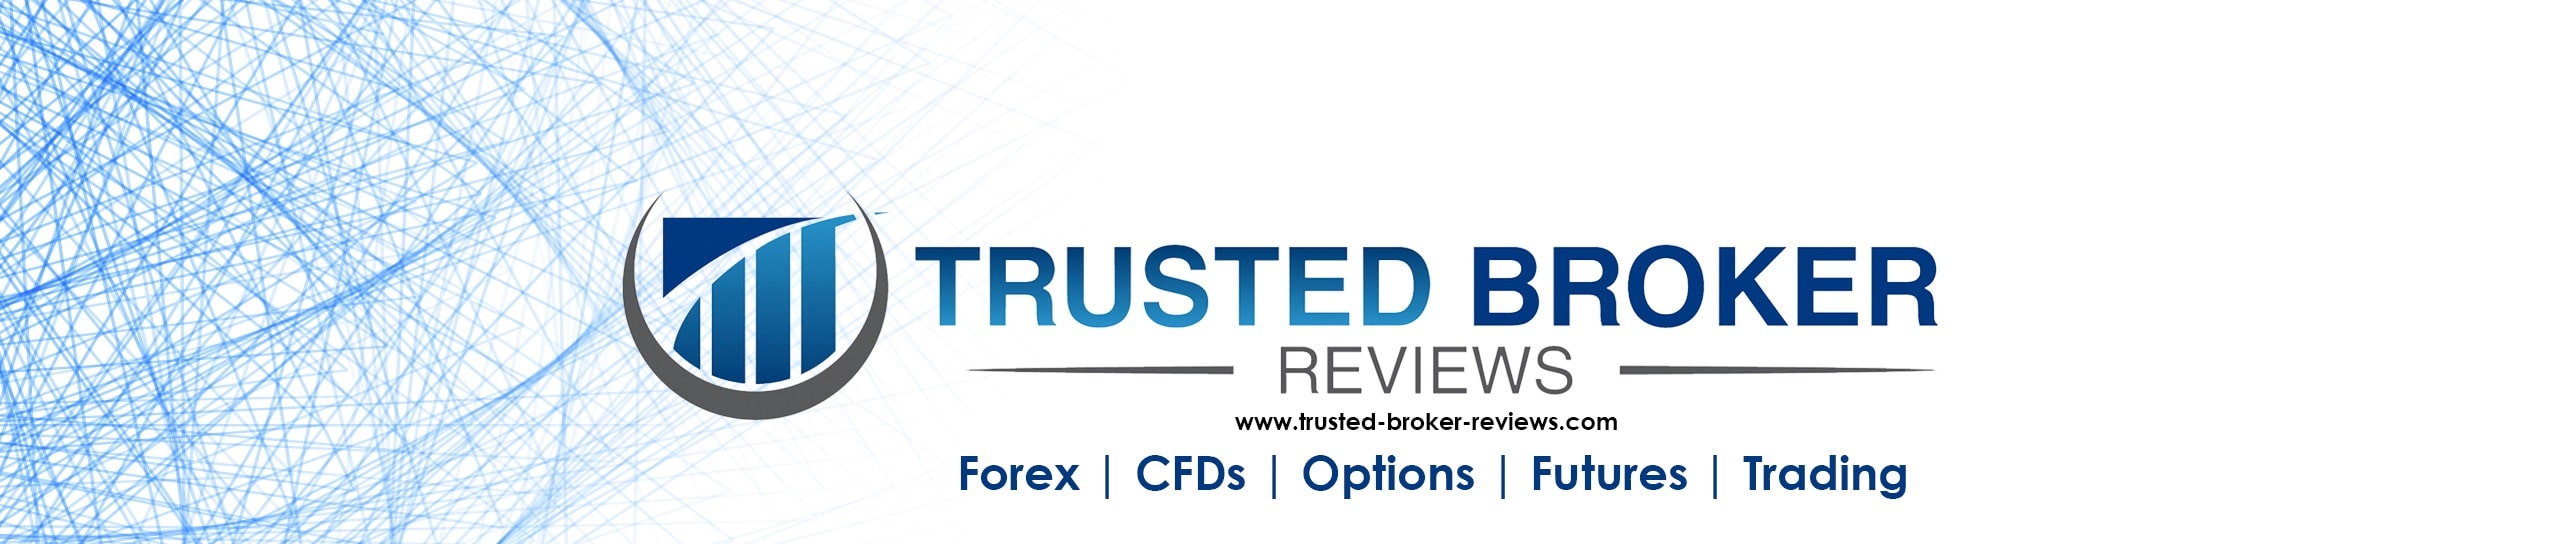 Trusted Broker Reviews About us Logo